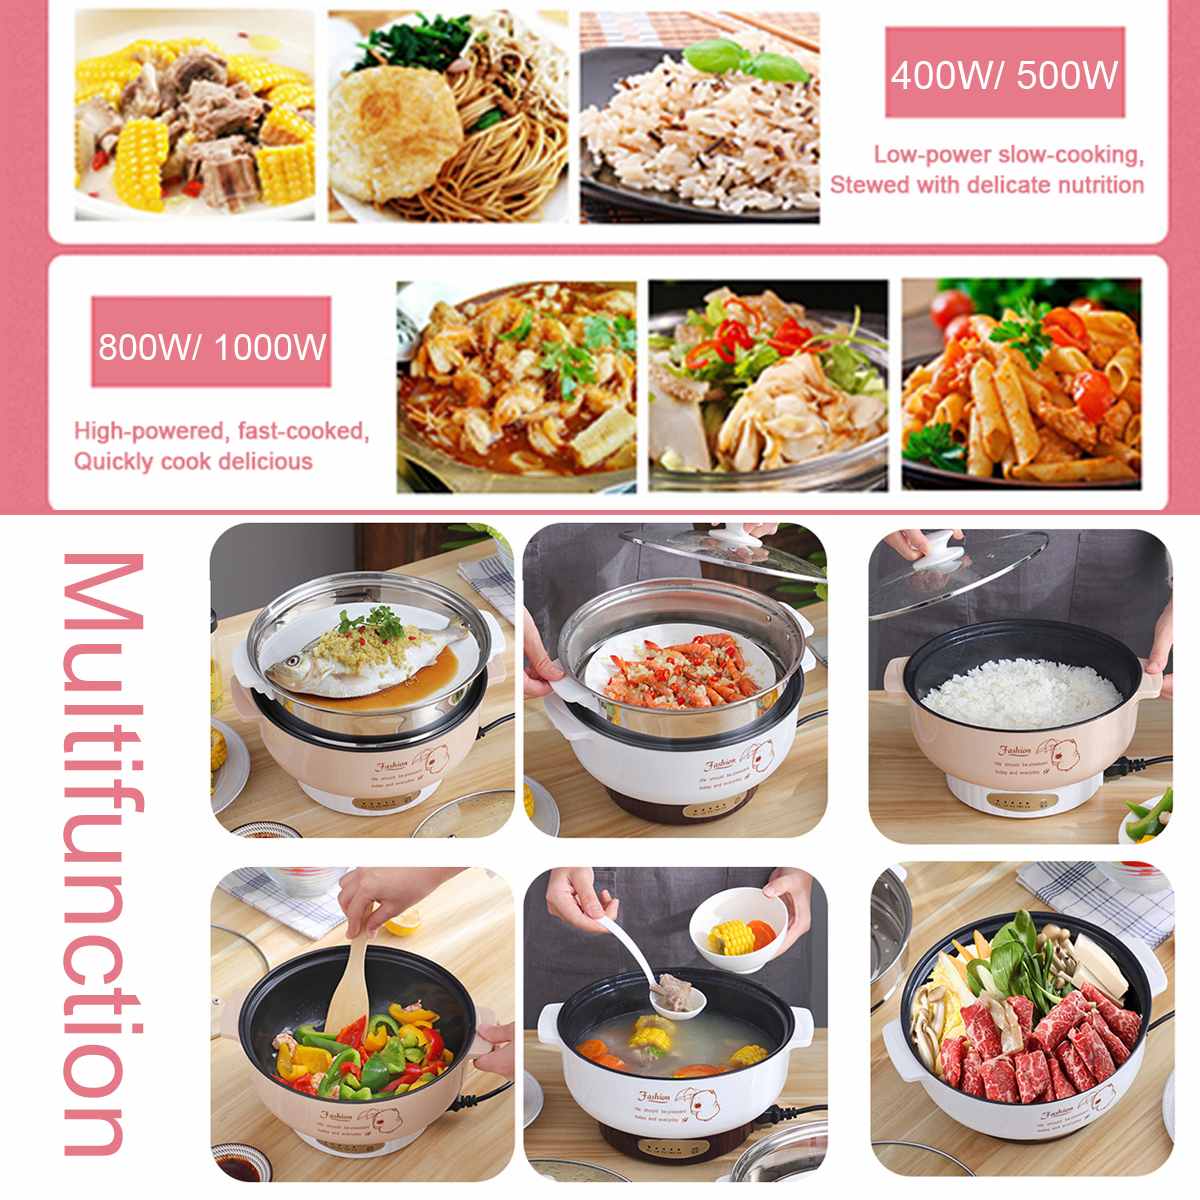 220V Mini Rice Cooker Electric cooker Multi Electric Cooking Machine Single/Double Layer Hot Pot Rice Cooker Non-stick pan 100